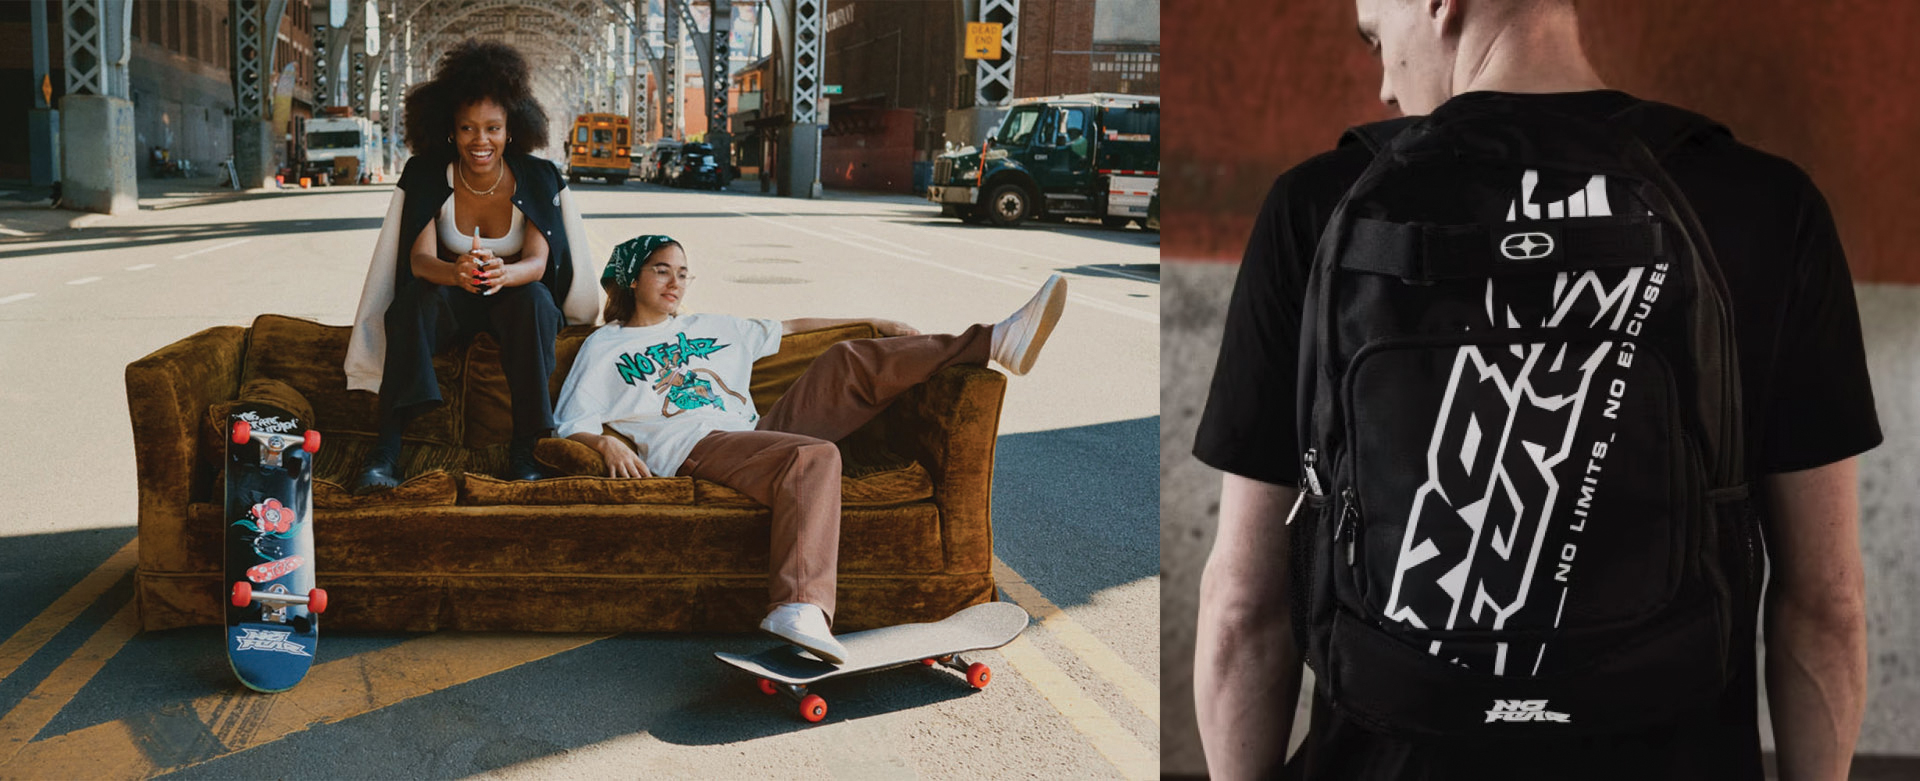 Extreme sport lifestyle brand No Fear launches a new line of streetwear.